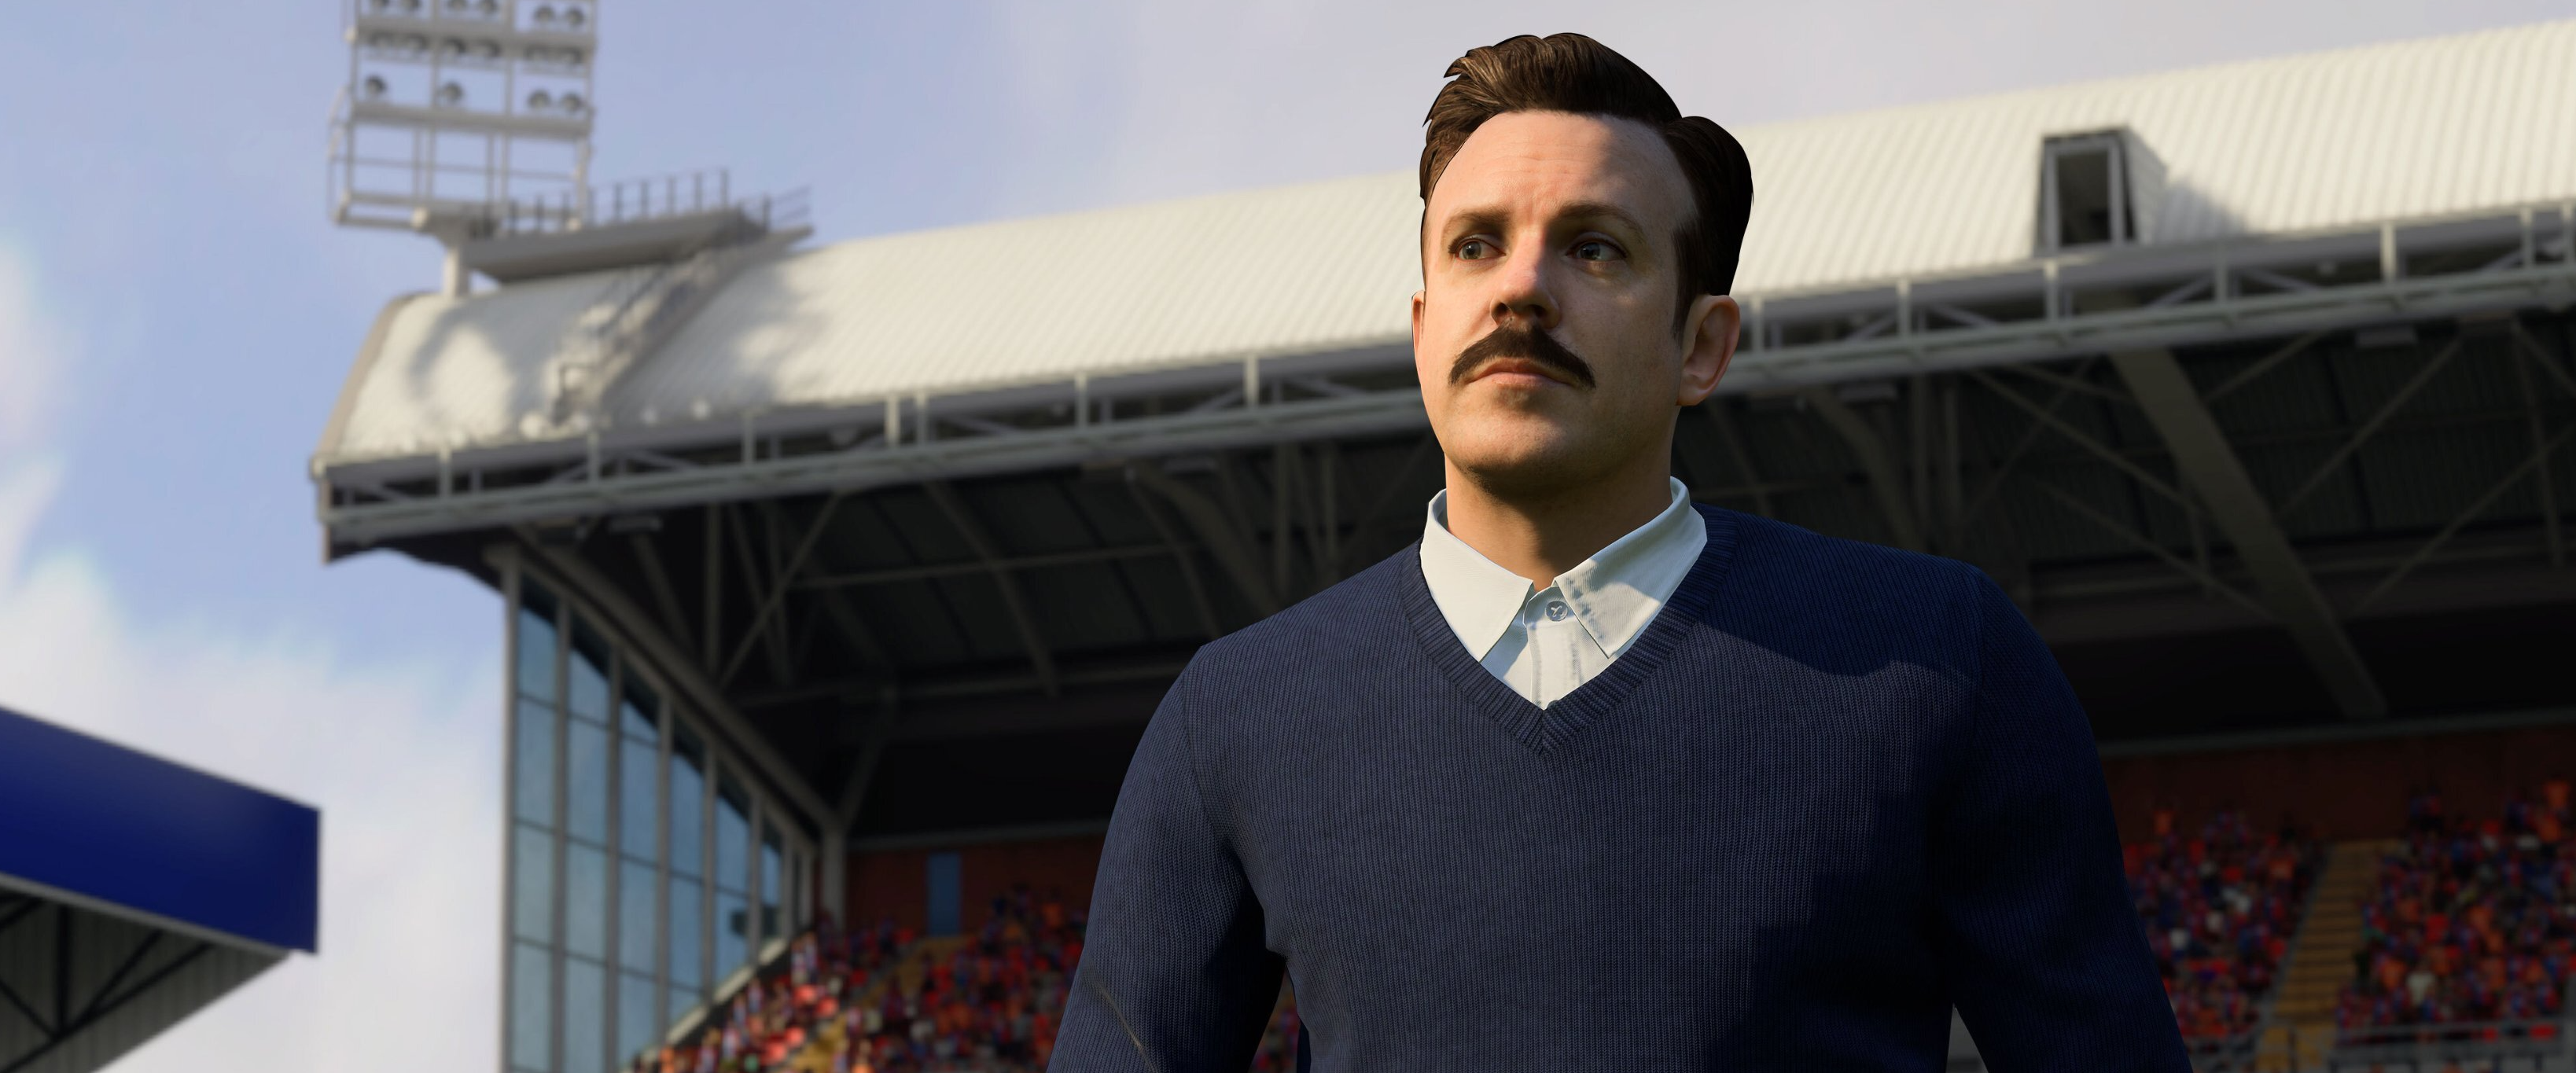 Ted Lasso and AFC Richmond are coming to FIFA 23, meaning I have to buy the game